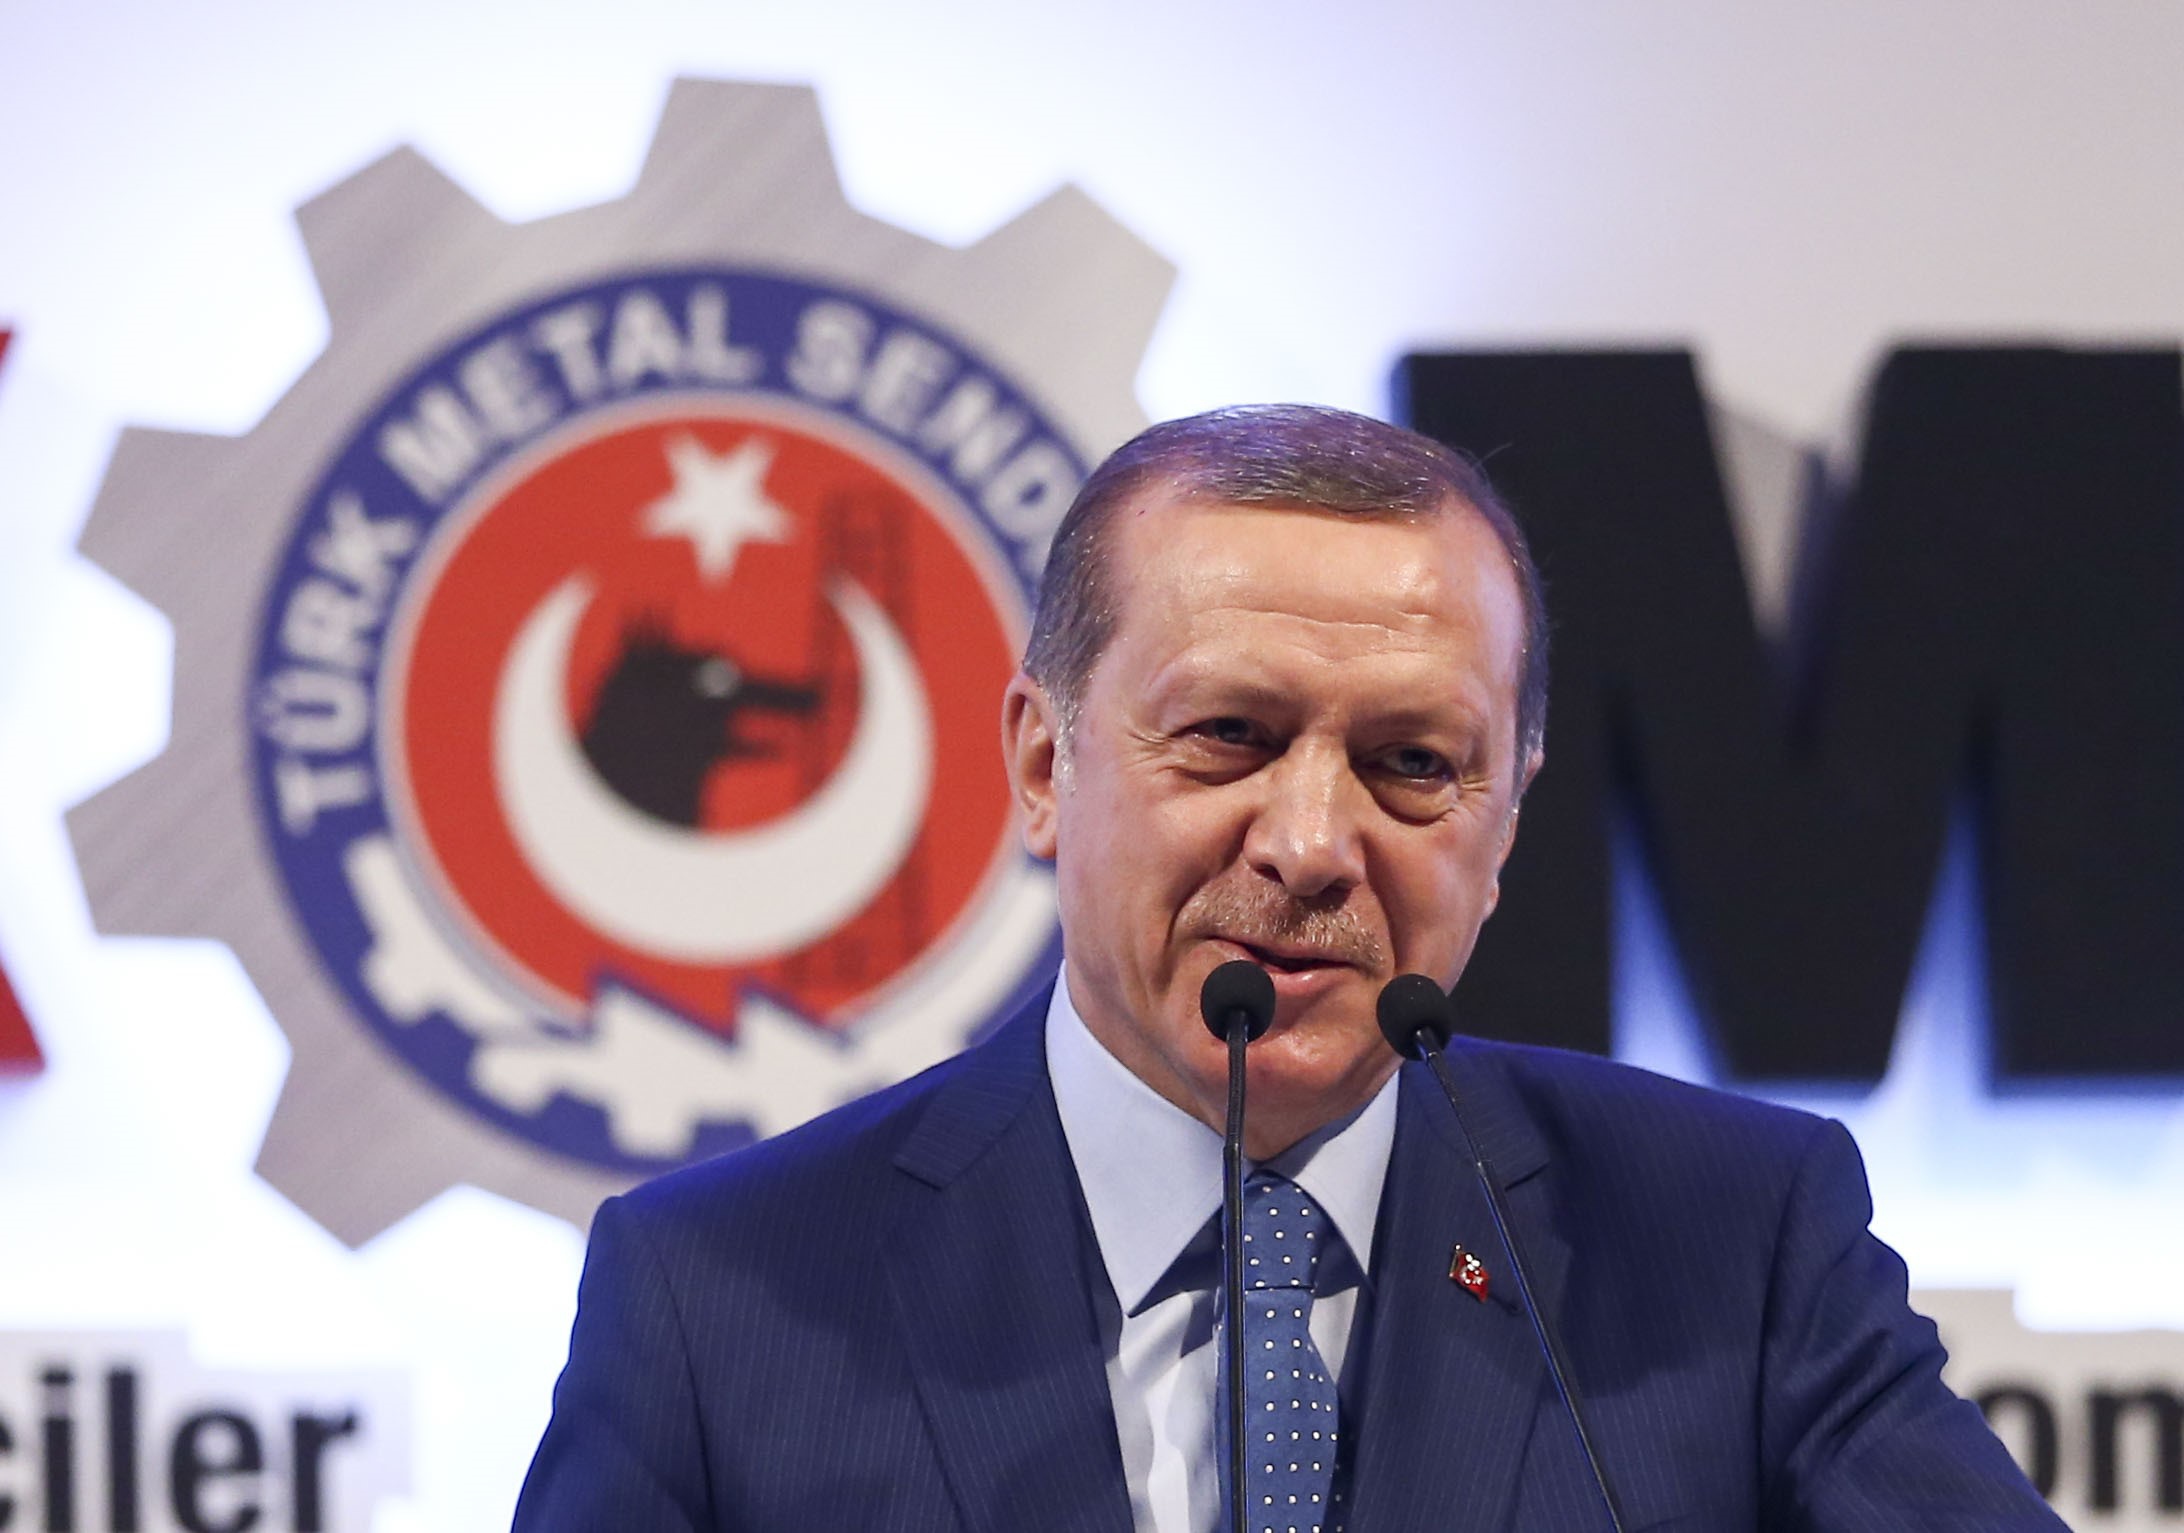 Turkish President Recep Tayyip Erdogan delivers a speech marking the International Women's Day during the 21st Women Workers' Grand Convention of metal unions in capital Ankara, Turkey on March 08, 2016.